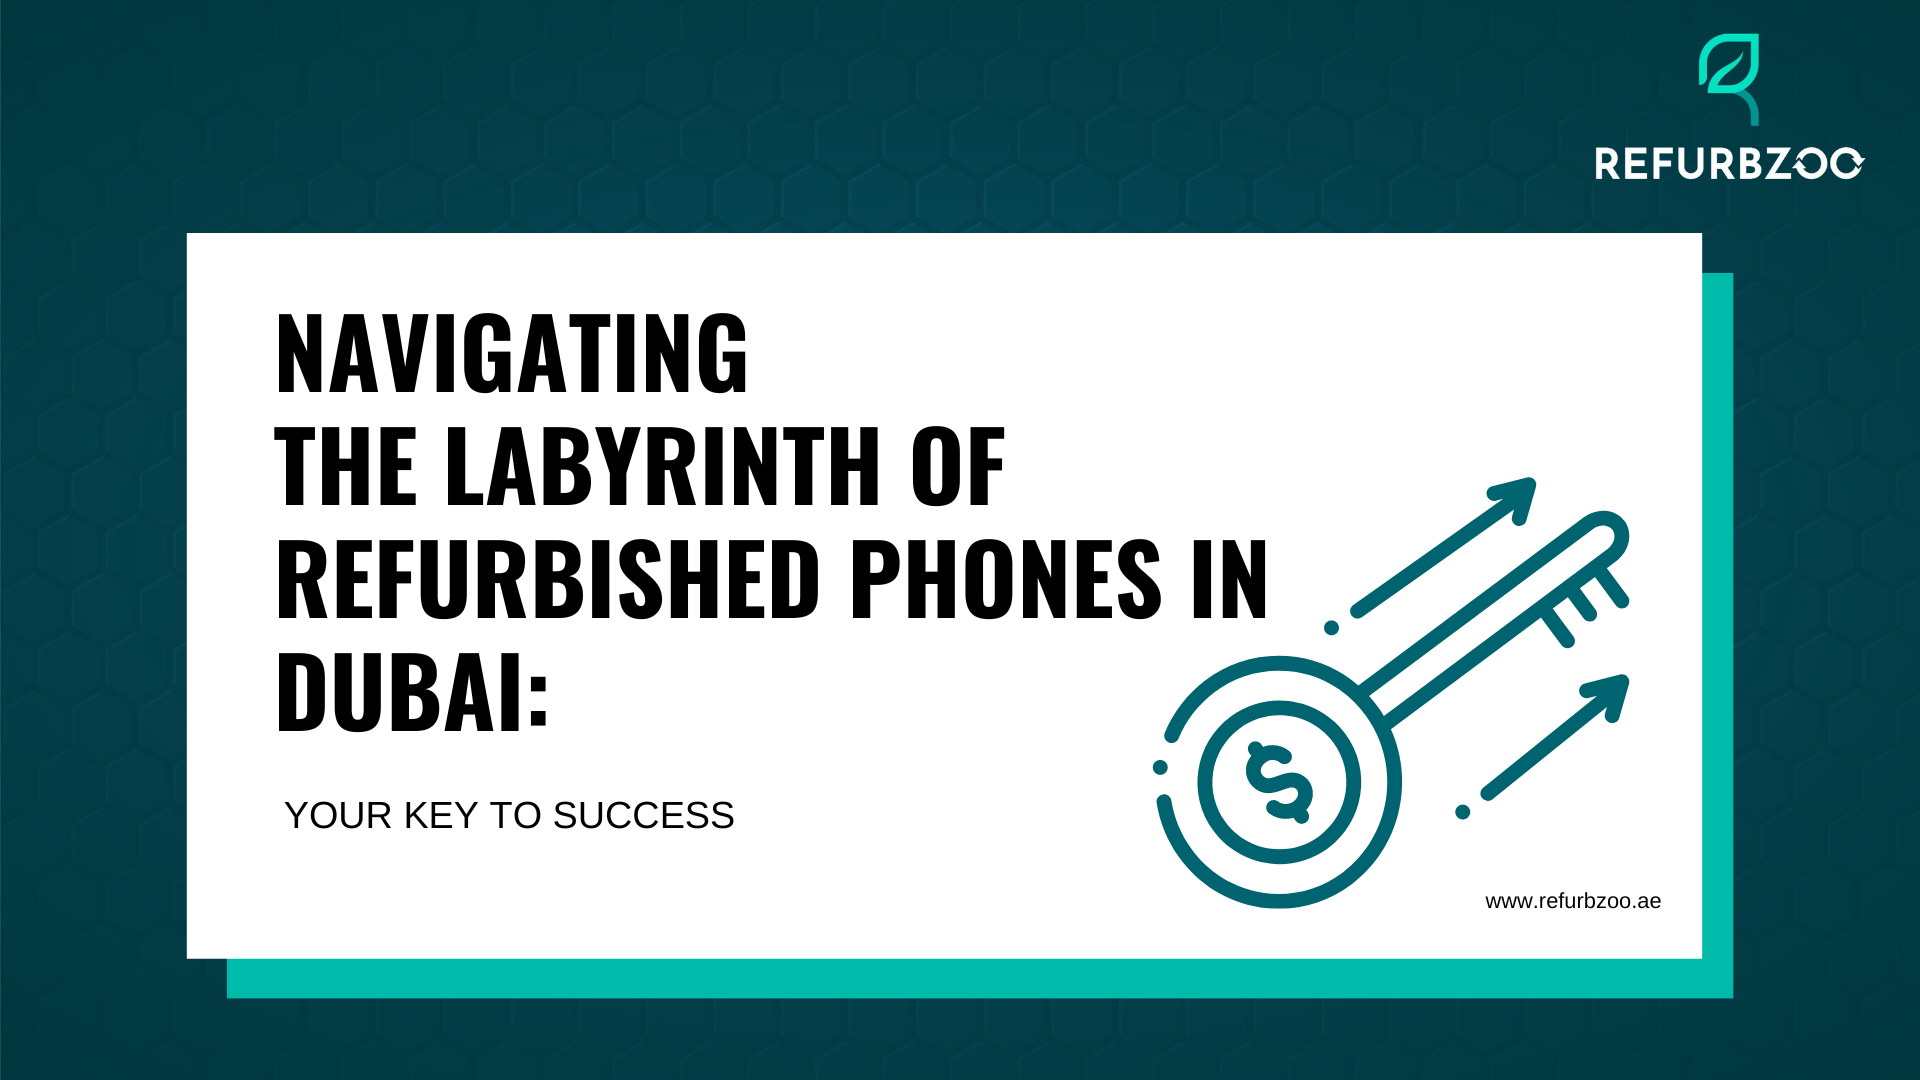 Navigating The Labyrinth of Refurbished Phones in Dubai: Your Key to Success